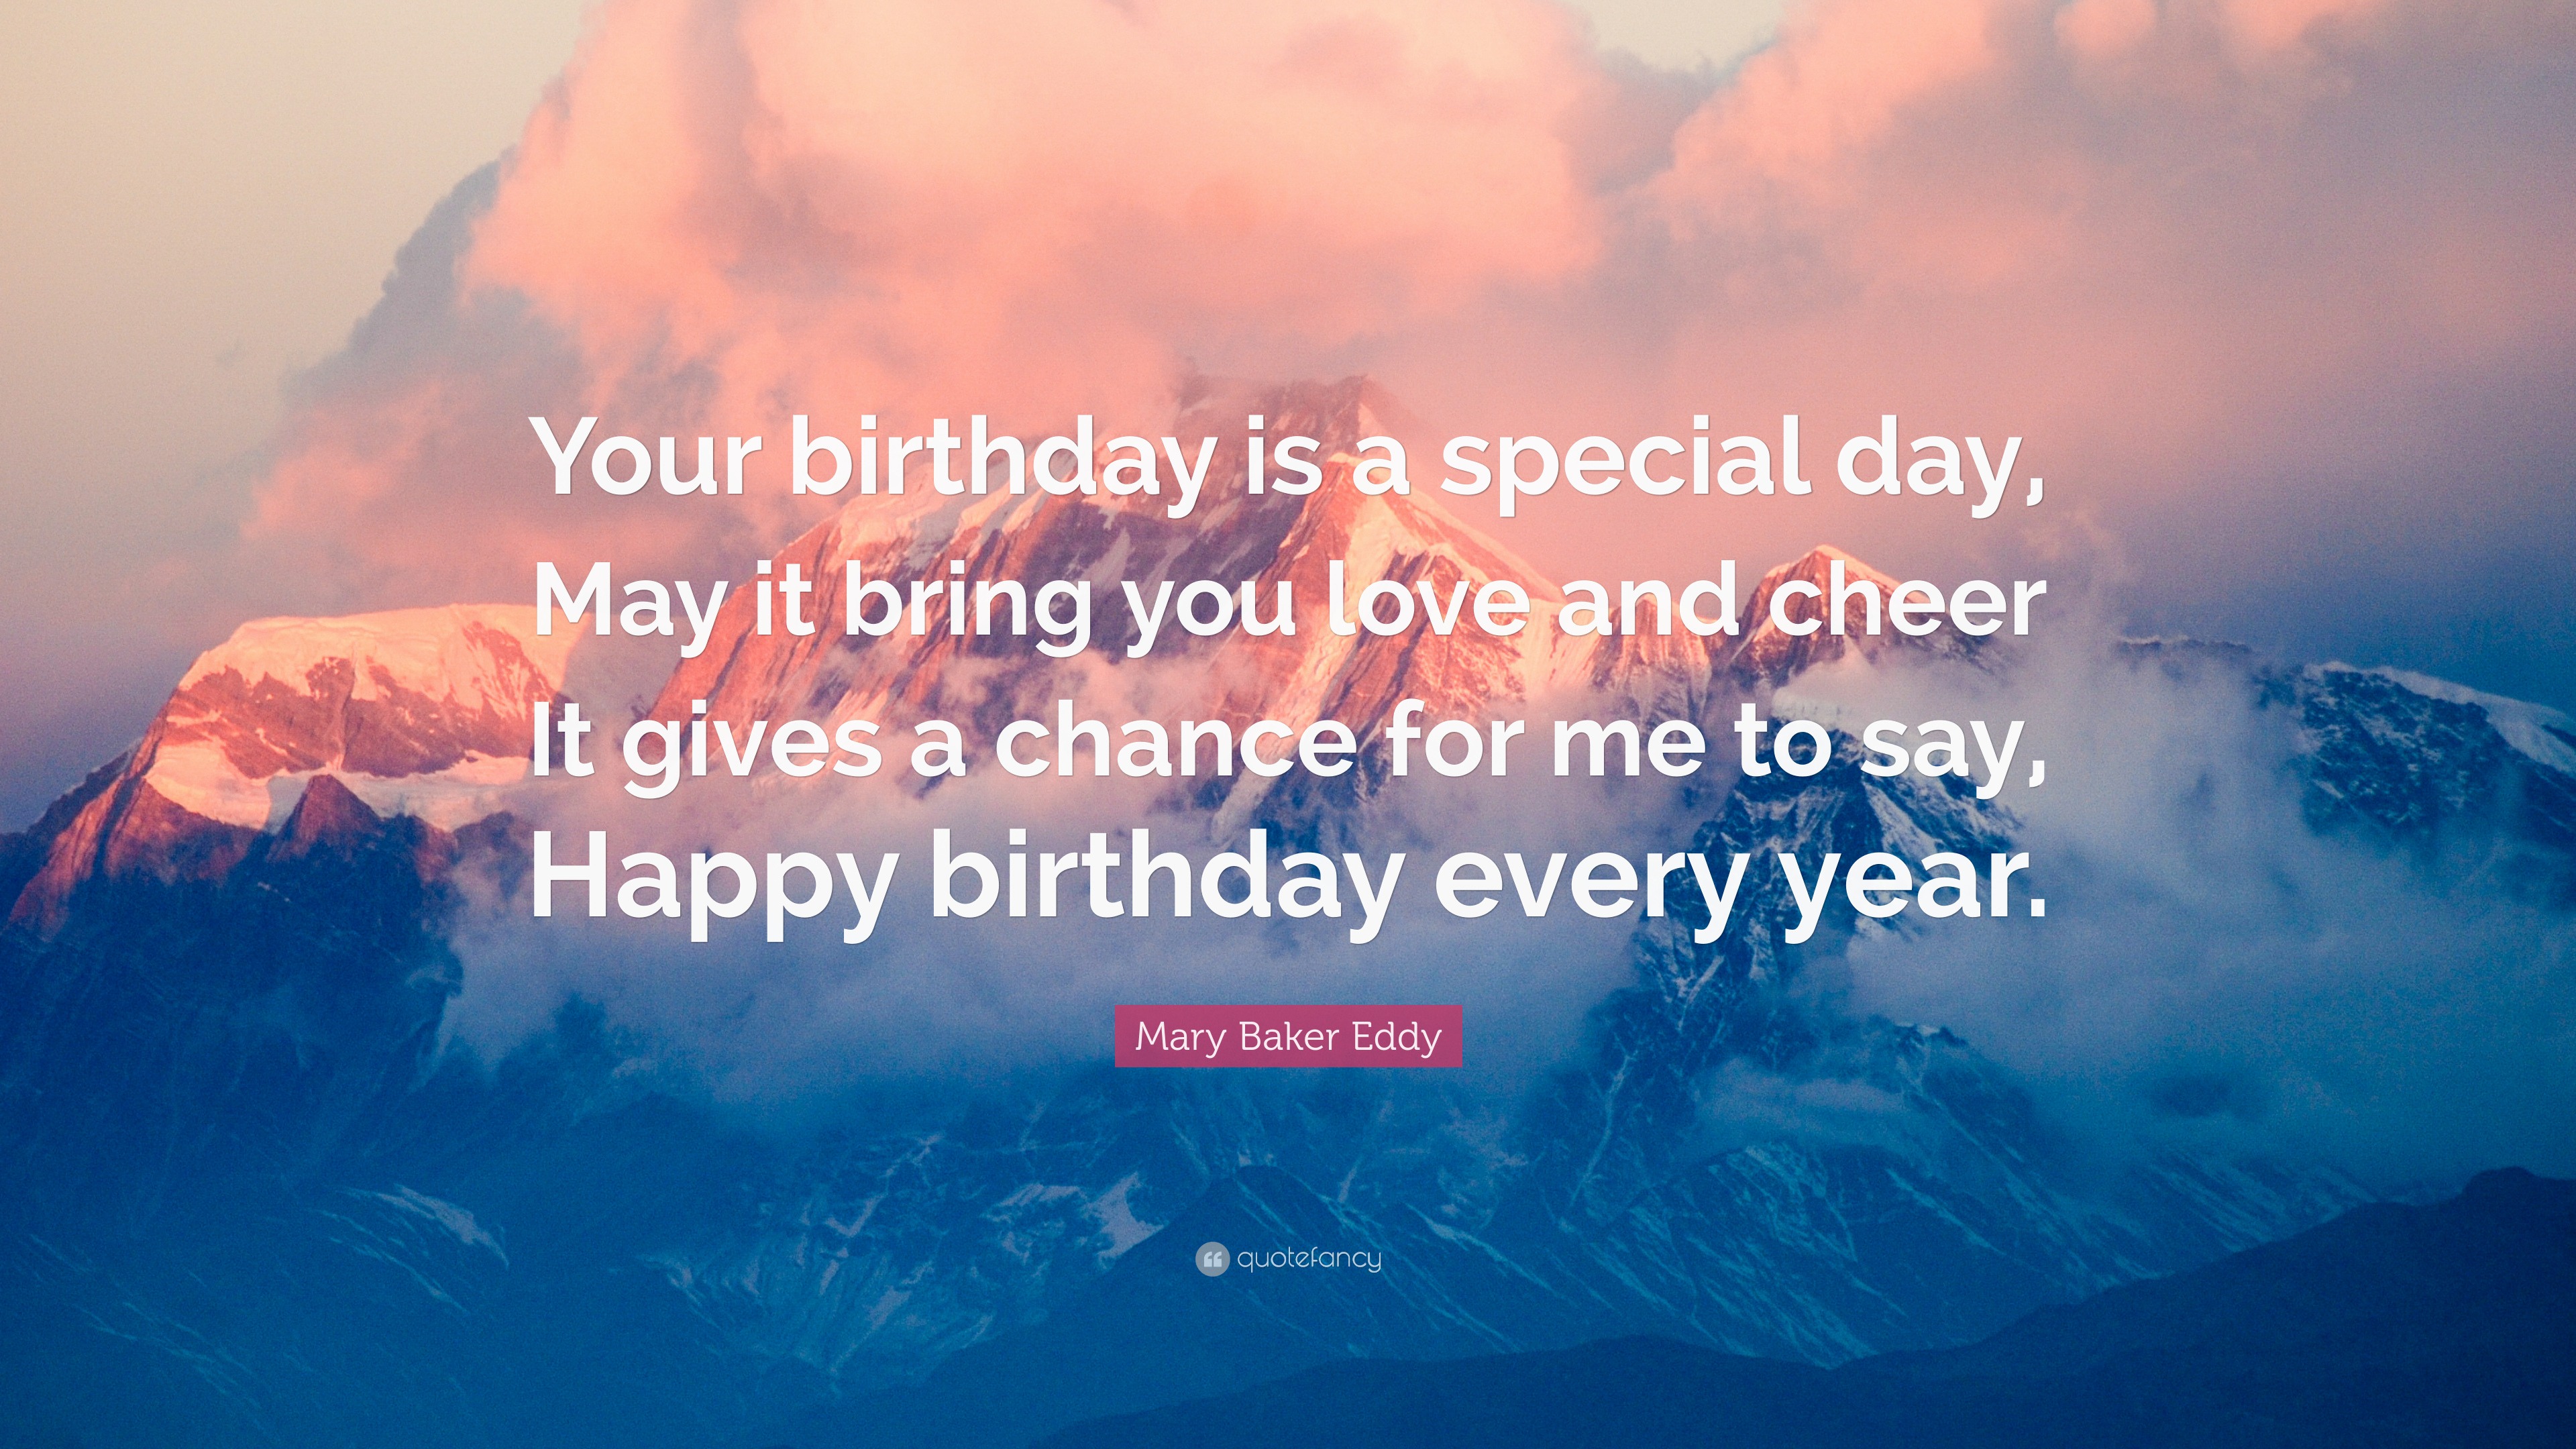 Mary Baker Eddy Quote Your Birthday Is A Special Day May It Bring You Love And Cheer It Gives A Chance For Me To Say Happy Birthday Every Ye